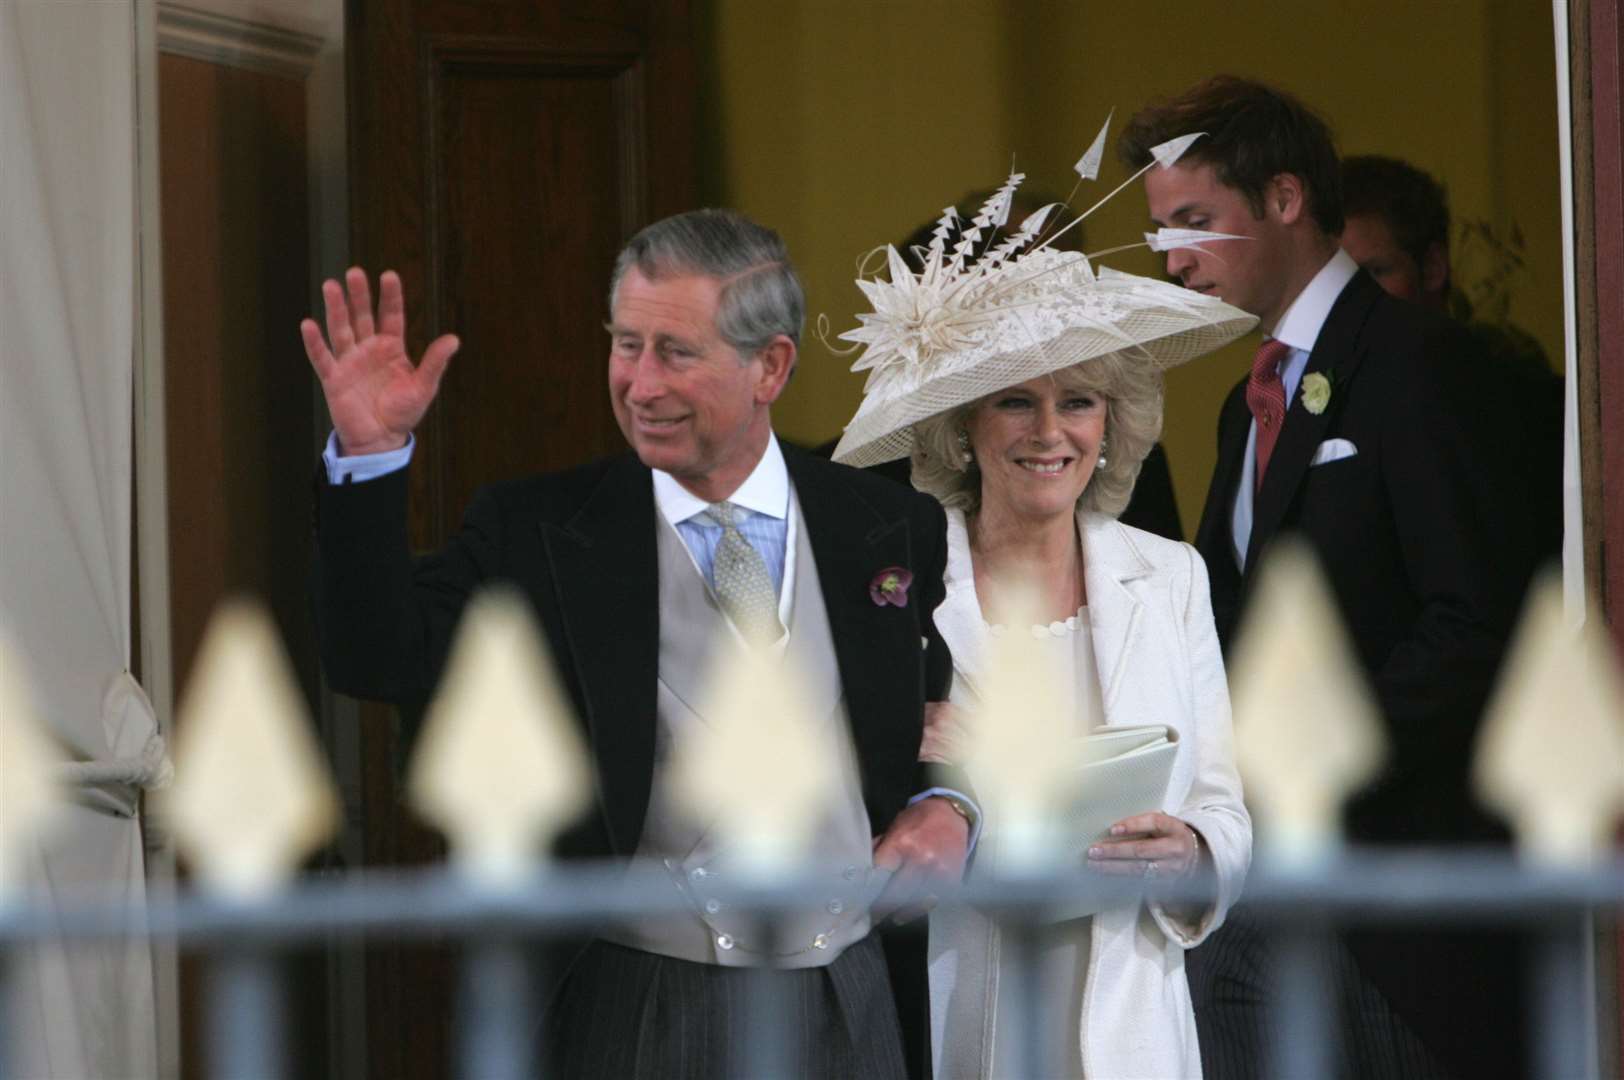 The marriage of the then-Prince Charles and Camilla Parker Bowles will be portrayed in The Crown (Tim Ockenden/PA)